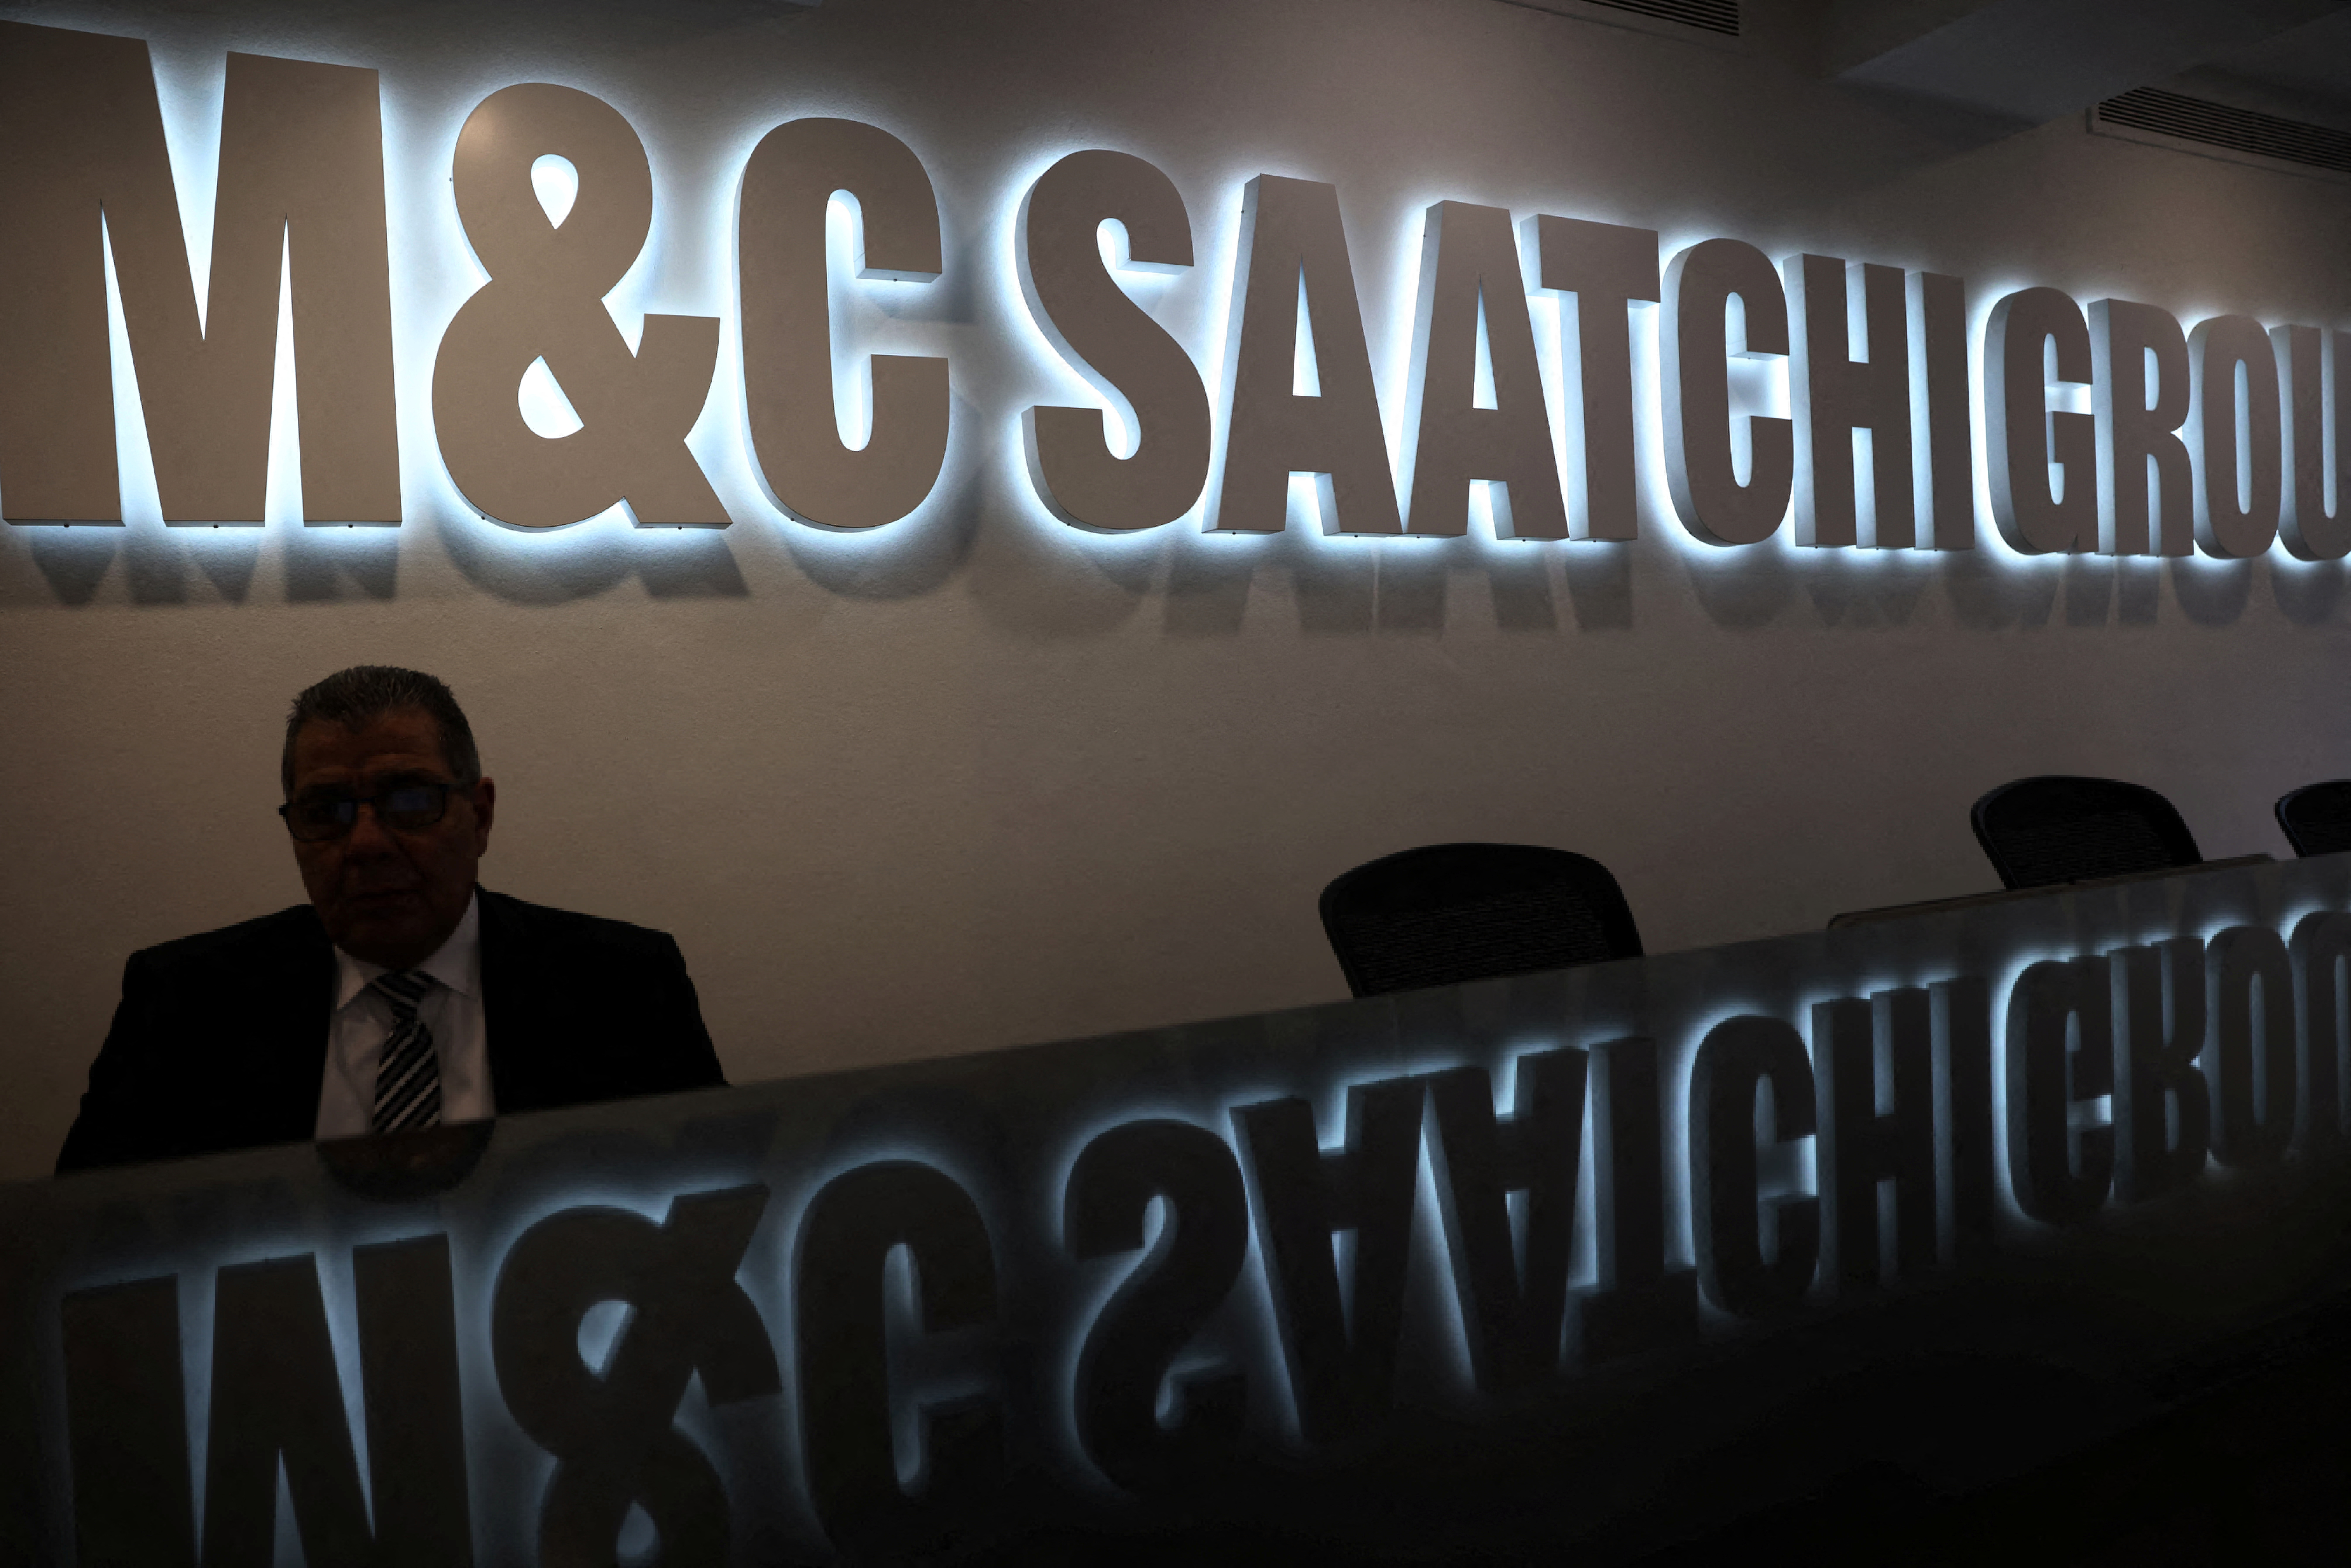 The M&C Saatchi office in central London